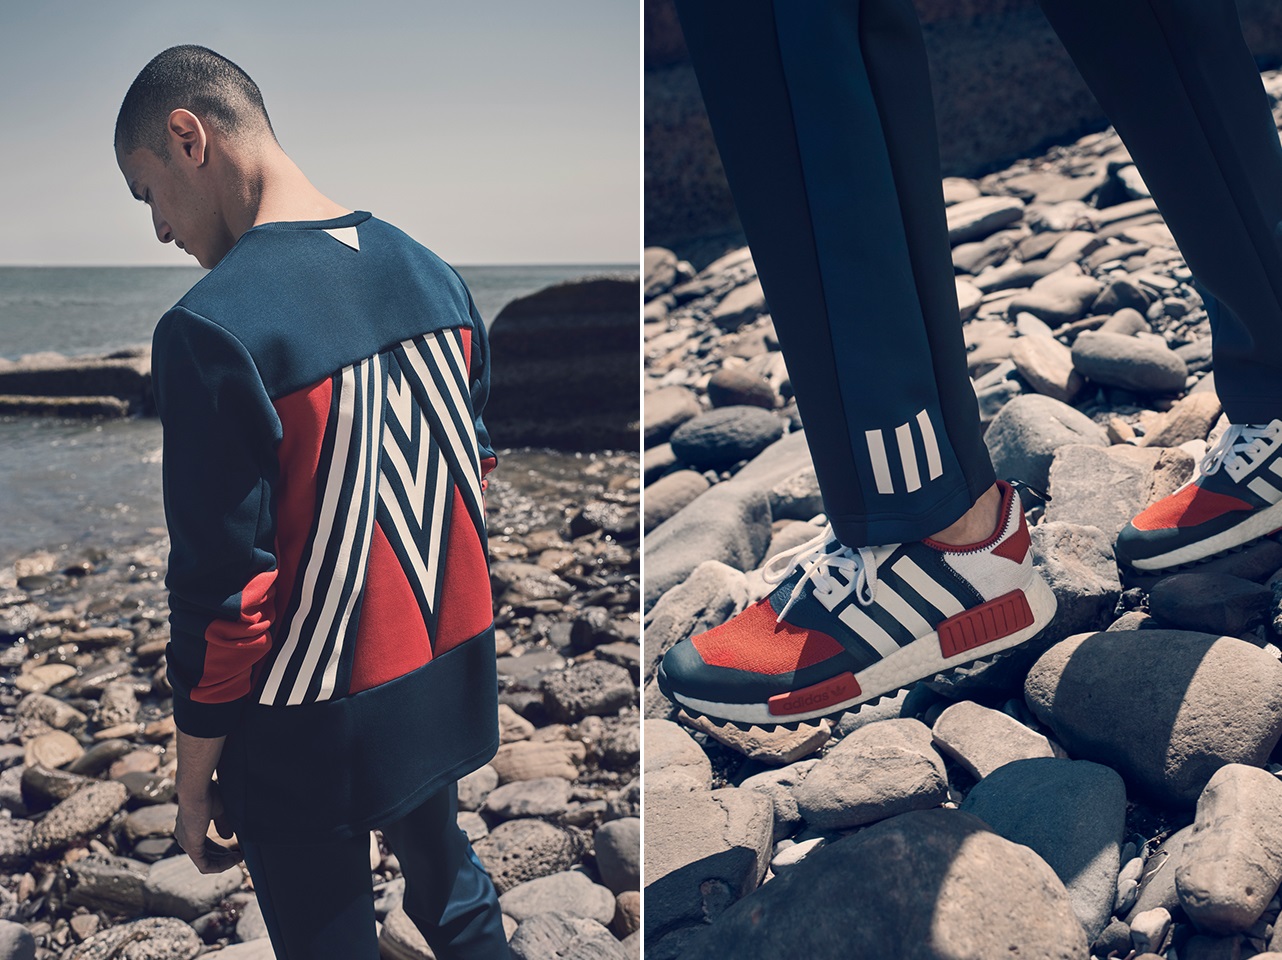 adidas Originals by White Mountaineering NMD含む2017年春夏アイテムが公開